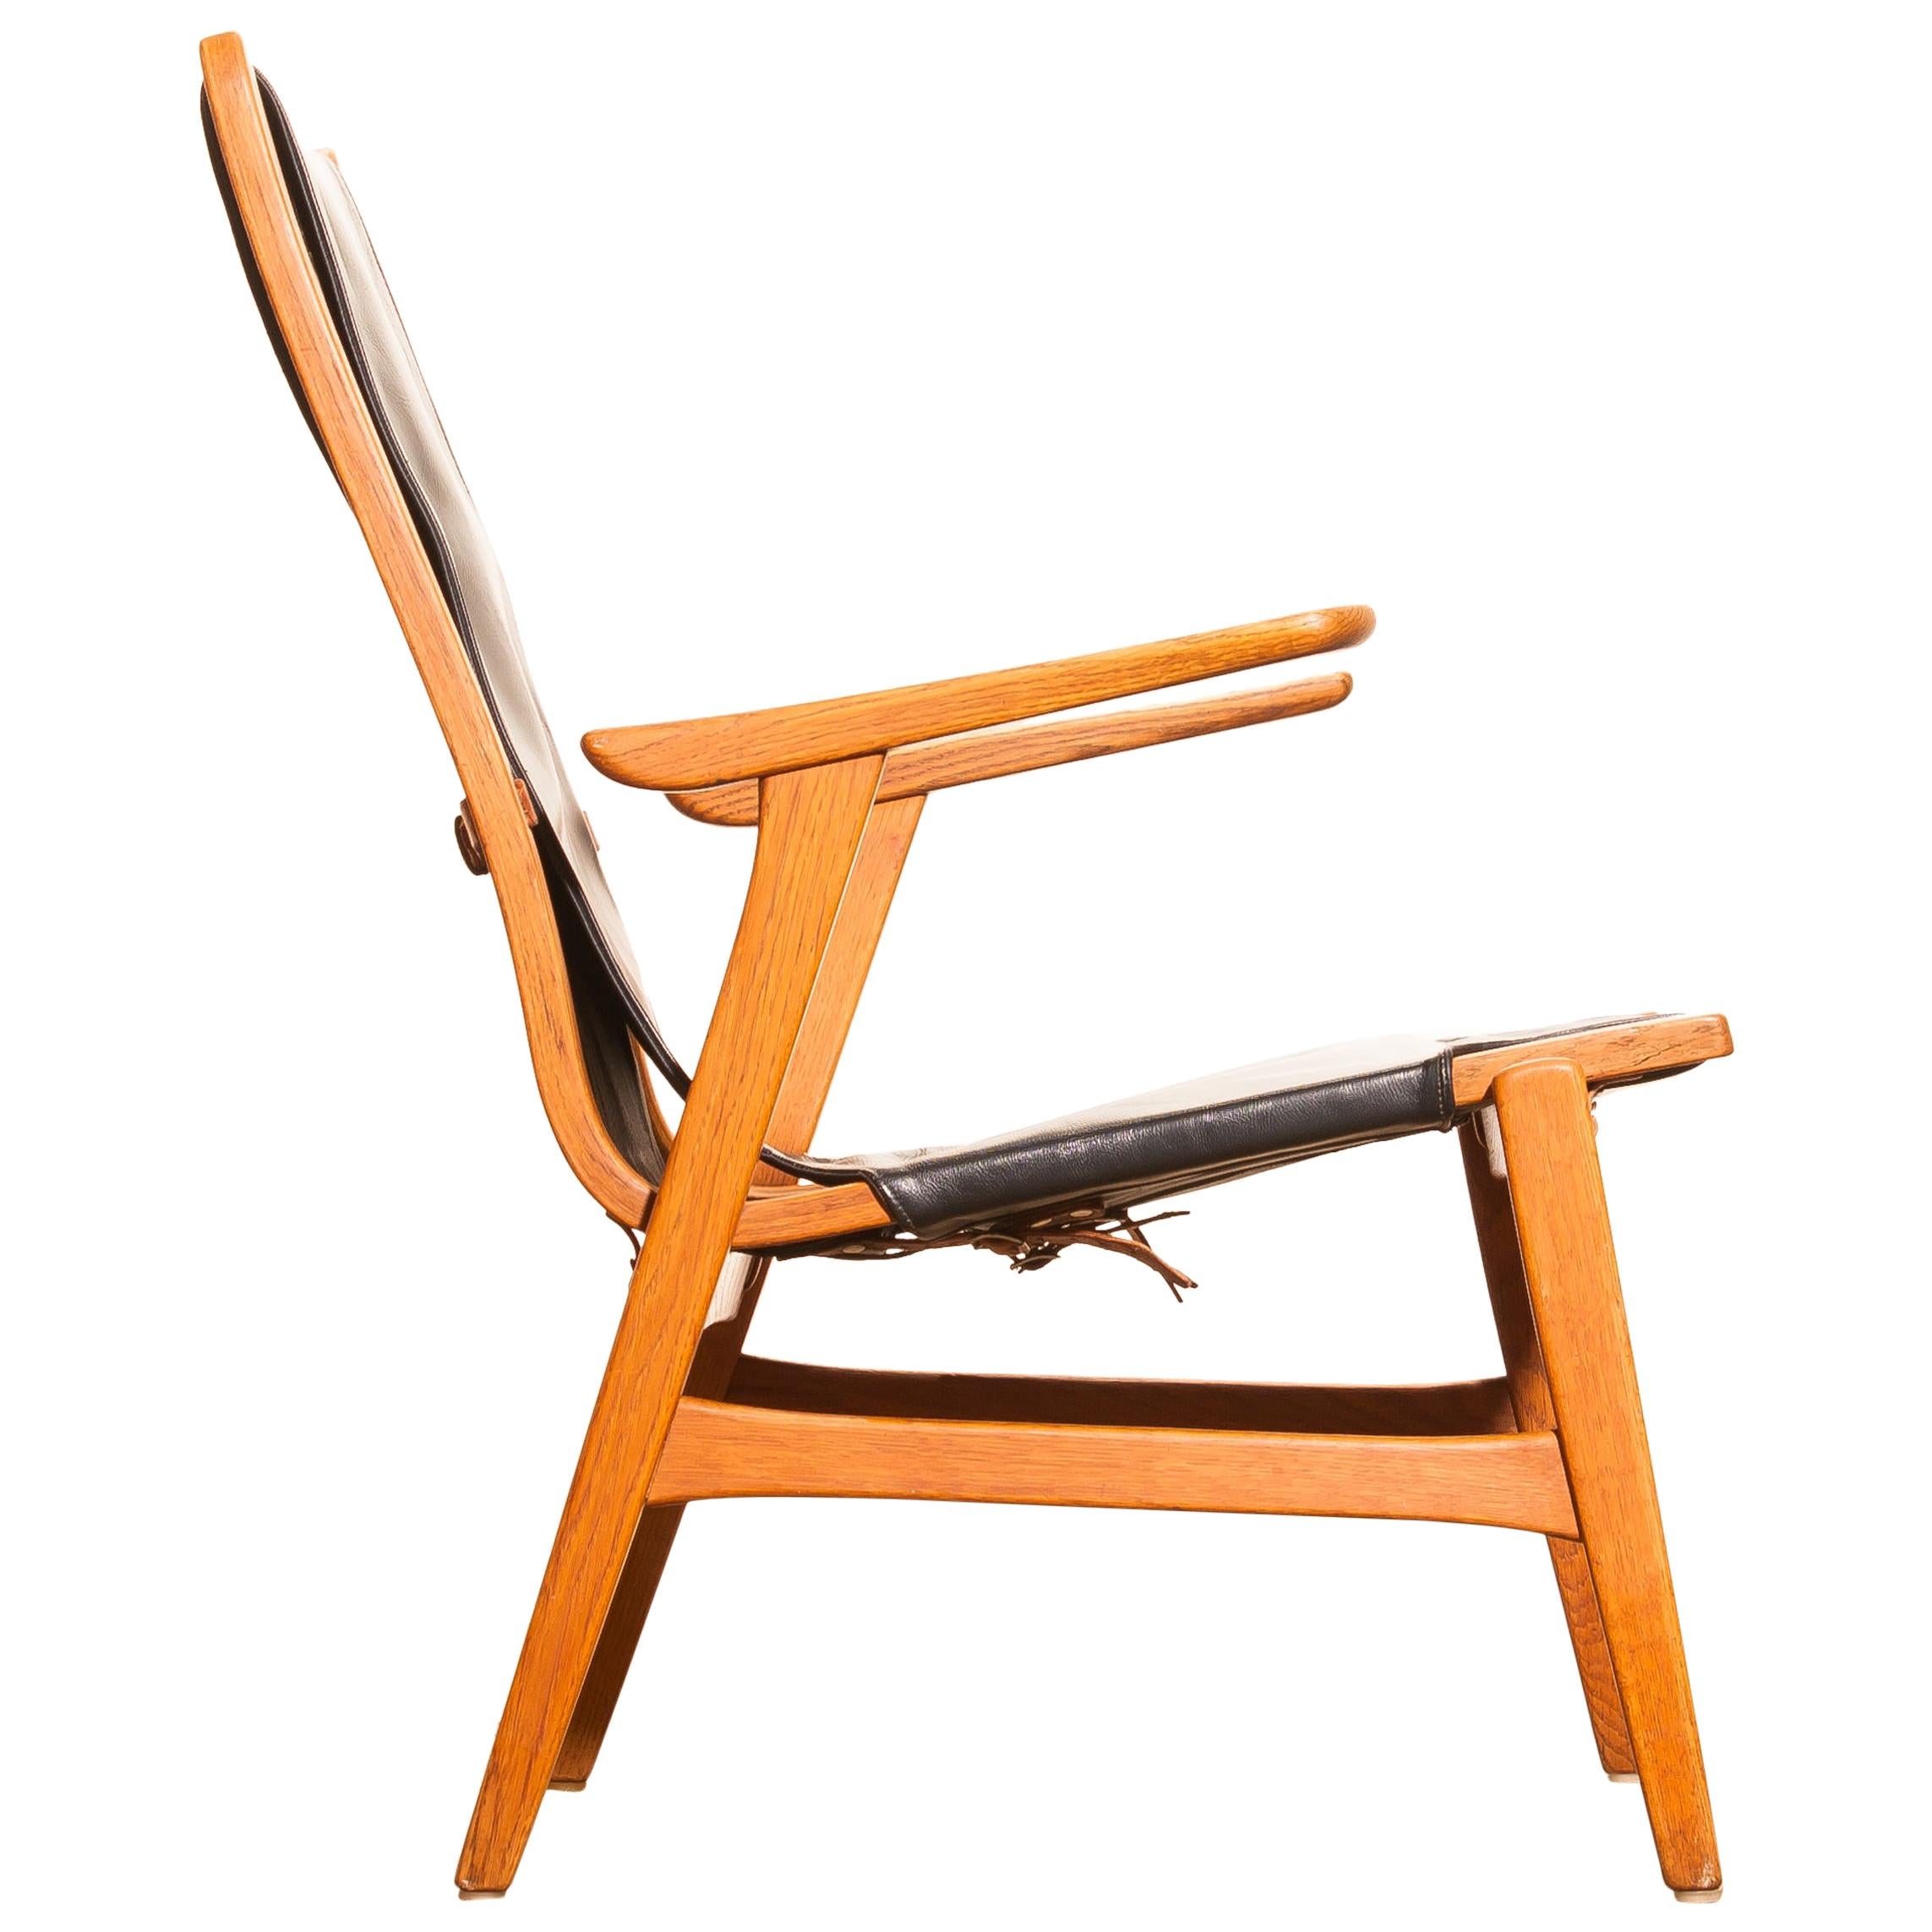 Swedish 1950s, Oak and Leatherette Hunting Chair 'Ulrika' by Östen Kristiansson